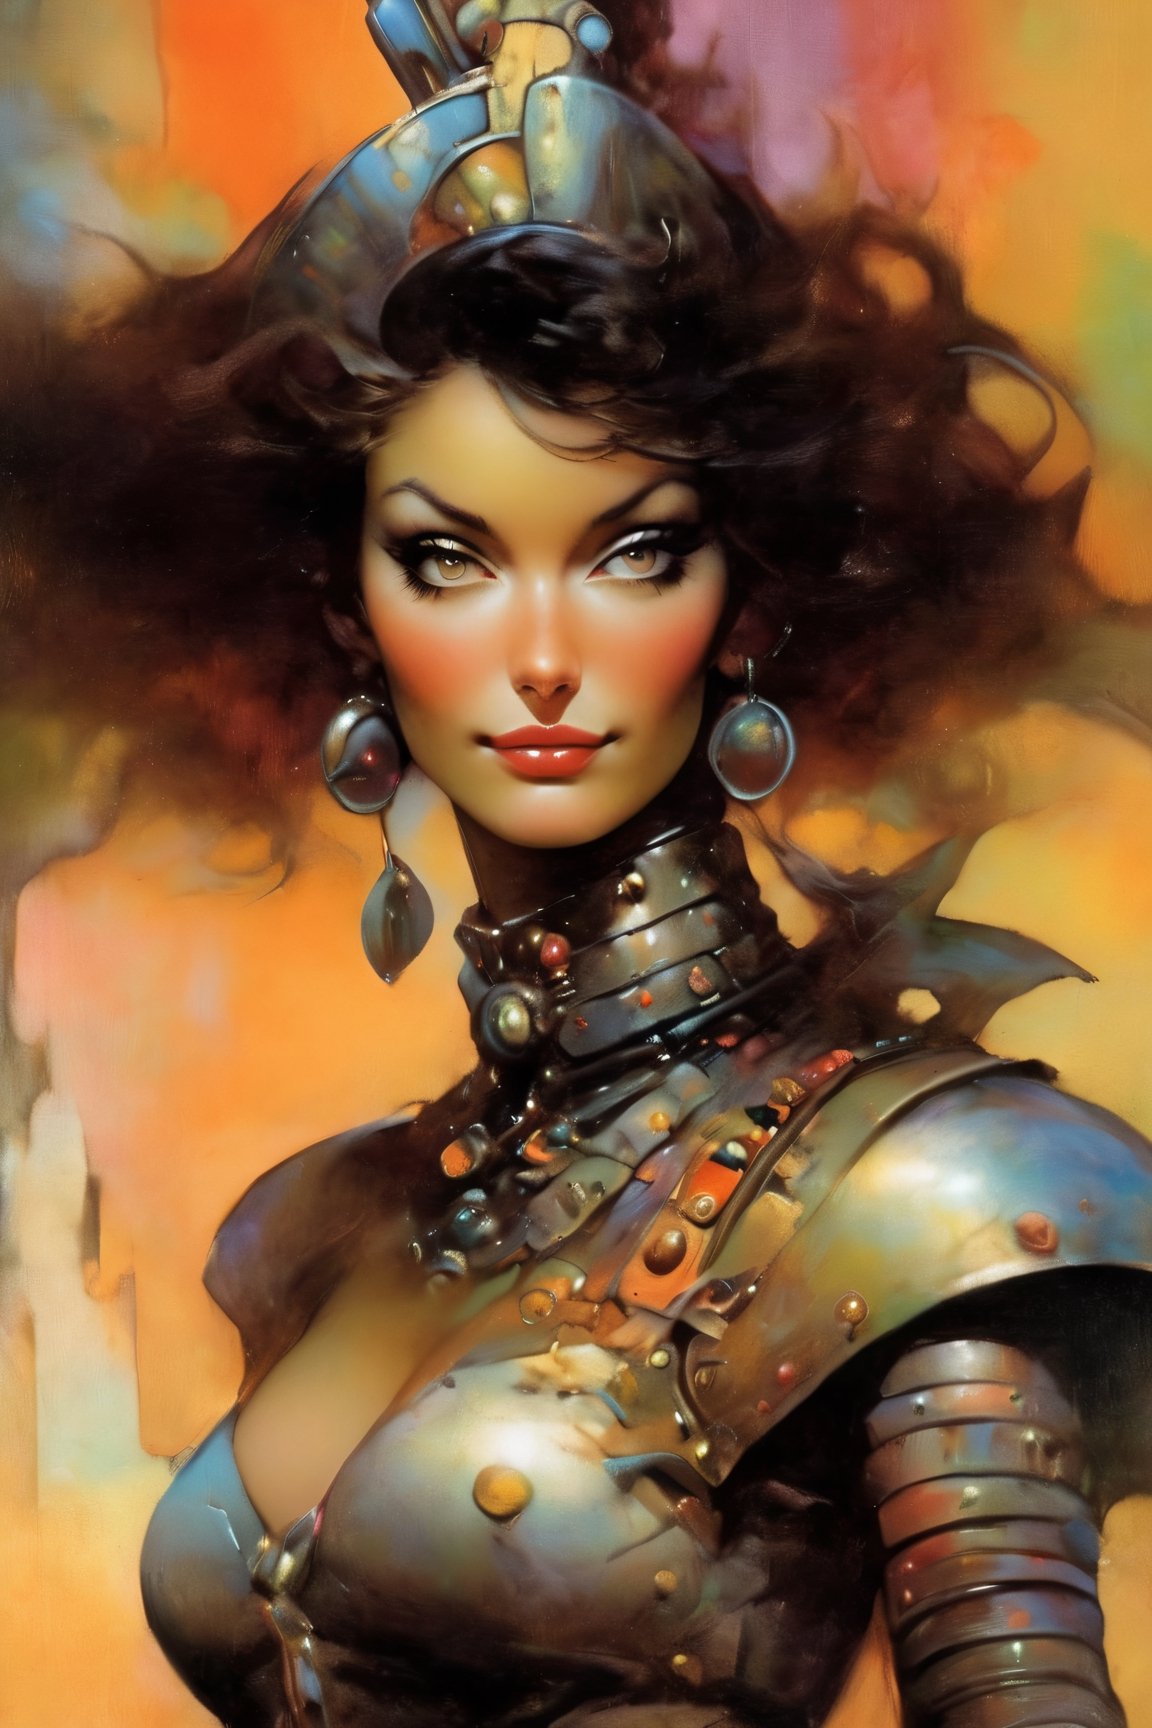 art by Masamune Shirow, art by J.C. Leyendecker, a masterpiece, stunning beauty, perfect face, full-body, hyper-realistic oil painting, vibrant colors, Body horror, steampunk spacesuit, two women looking directly out to viewer, wry smile on their faces, neon face with multiple coloured circuits on it, full face translucent visor, in the style of futuristic space glamour, Steam punk, tribal adornments, frank frazetta style pose, perfect makeup, boris vallejo style background pop art consumer culture, plain neon steampunk background, full figure poses,biopunk style,cyberpunk style,art by sargent,Oil painting of Mona Lisa ,Leaf